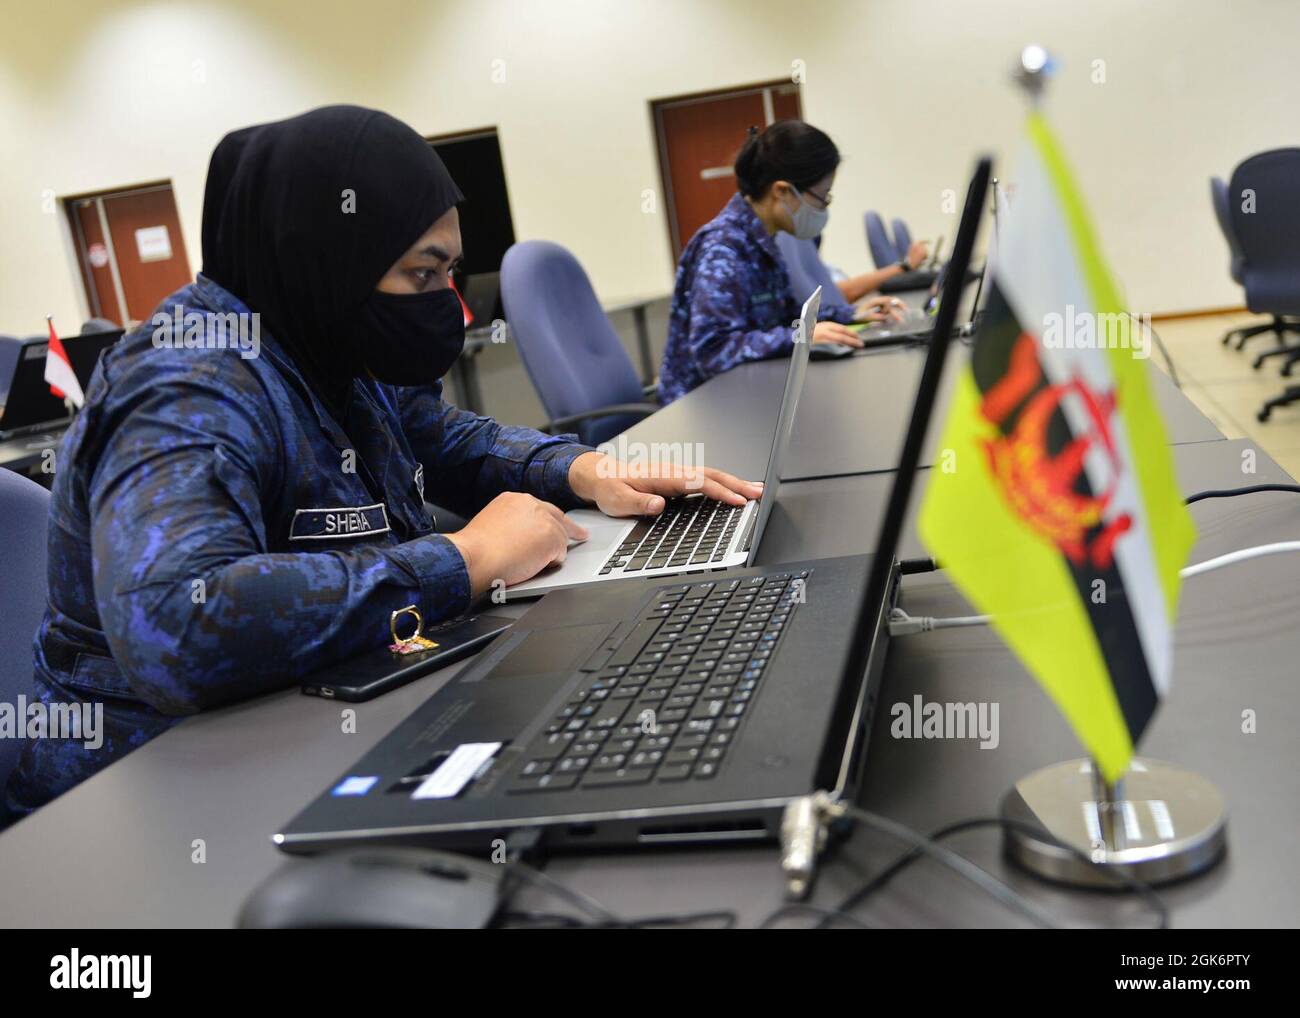 SINGAPORE (Aug. 18, 2021) – Royal Brunei Navy Lt. Sheha tracks vessels and analyses data during the Southeast Asia Cooperation and Training (SEACAT) 2021 command post exercise in the Changi Command and Control Centre at Changi Naval Base. In its 20th year, SEACAT is a multilateral exercise designed to enhance cooperation among 21 participating Southeast Asian countries and provide mutual support and a common goal to address crises, contingencies, and illegal activities in the maritime domain in support of a free and open Indo-Pacific. Stock Photo